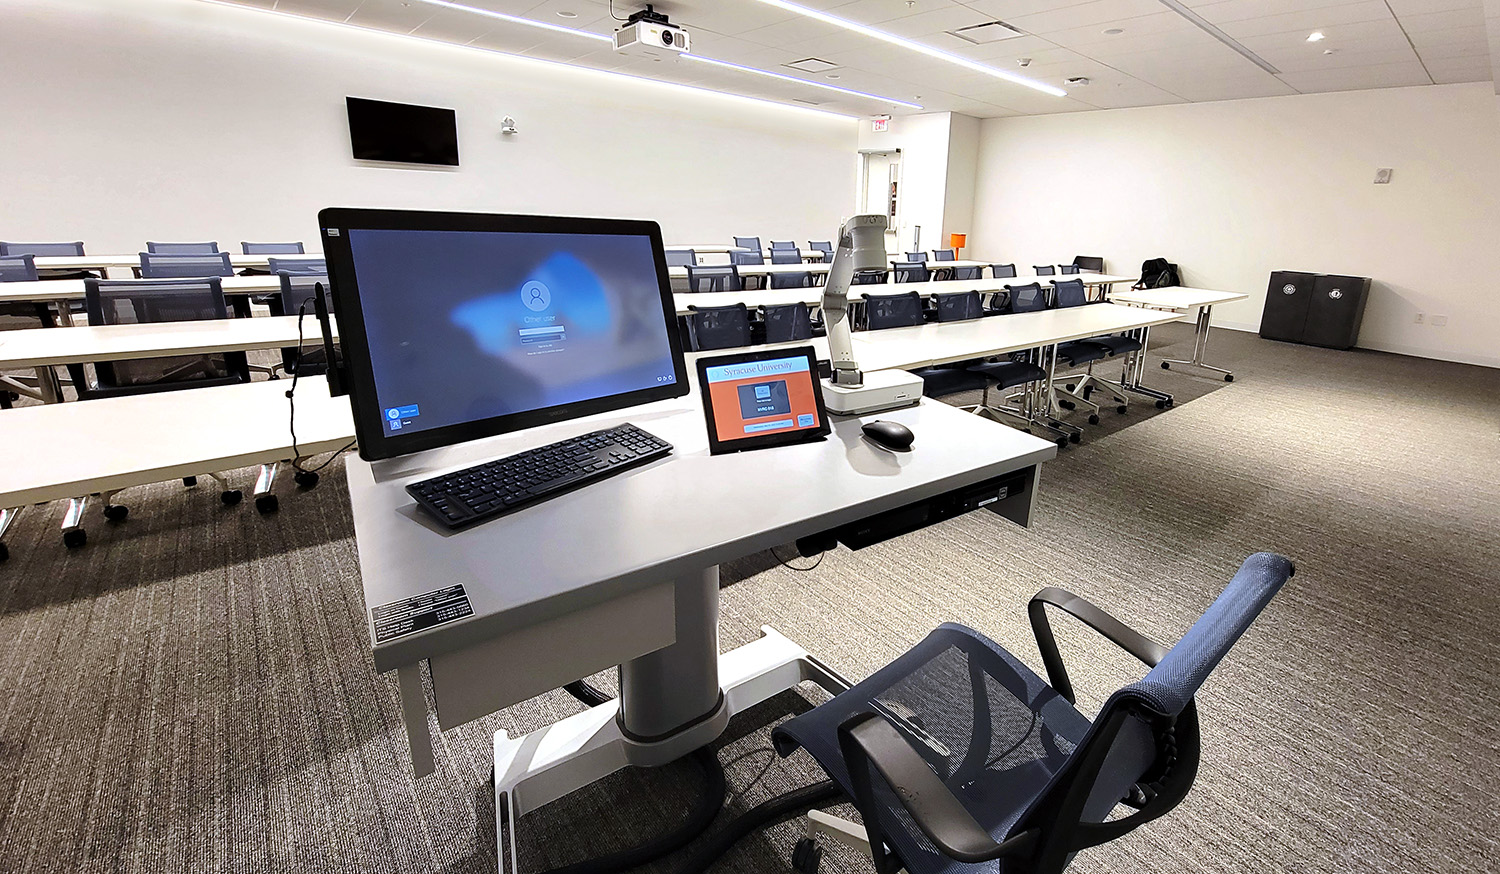 The standard classroom presentation workstation is a Steelcase AirTouch height-adjustable table outfitted with a micro-PC, an annotation touch screen, a Blu-ray player, a document camera, AV connectivity with power, and an Extron TLP Pro 1025T 10" Tabletop TouchLink Pro Touchpanel for system control.